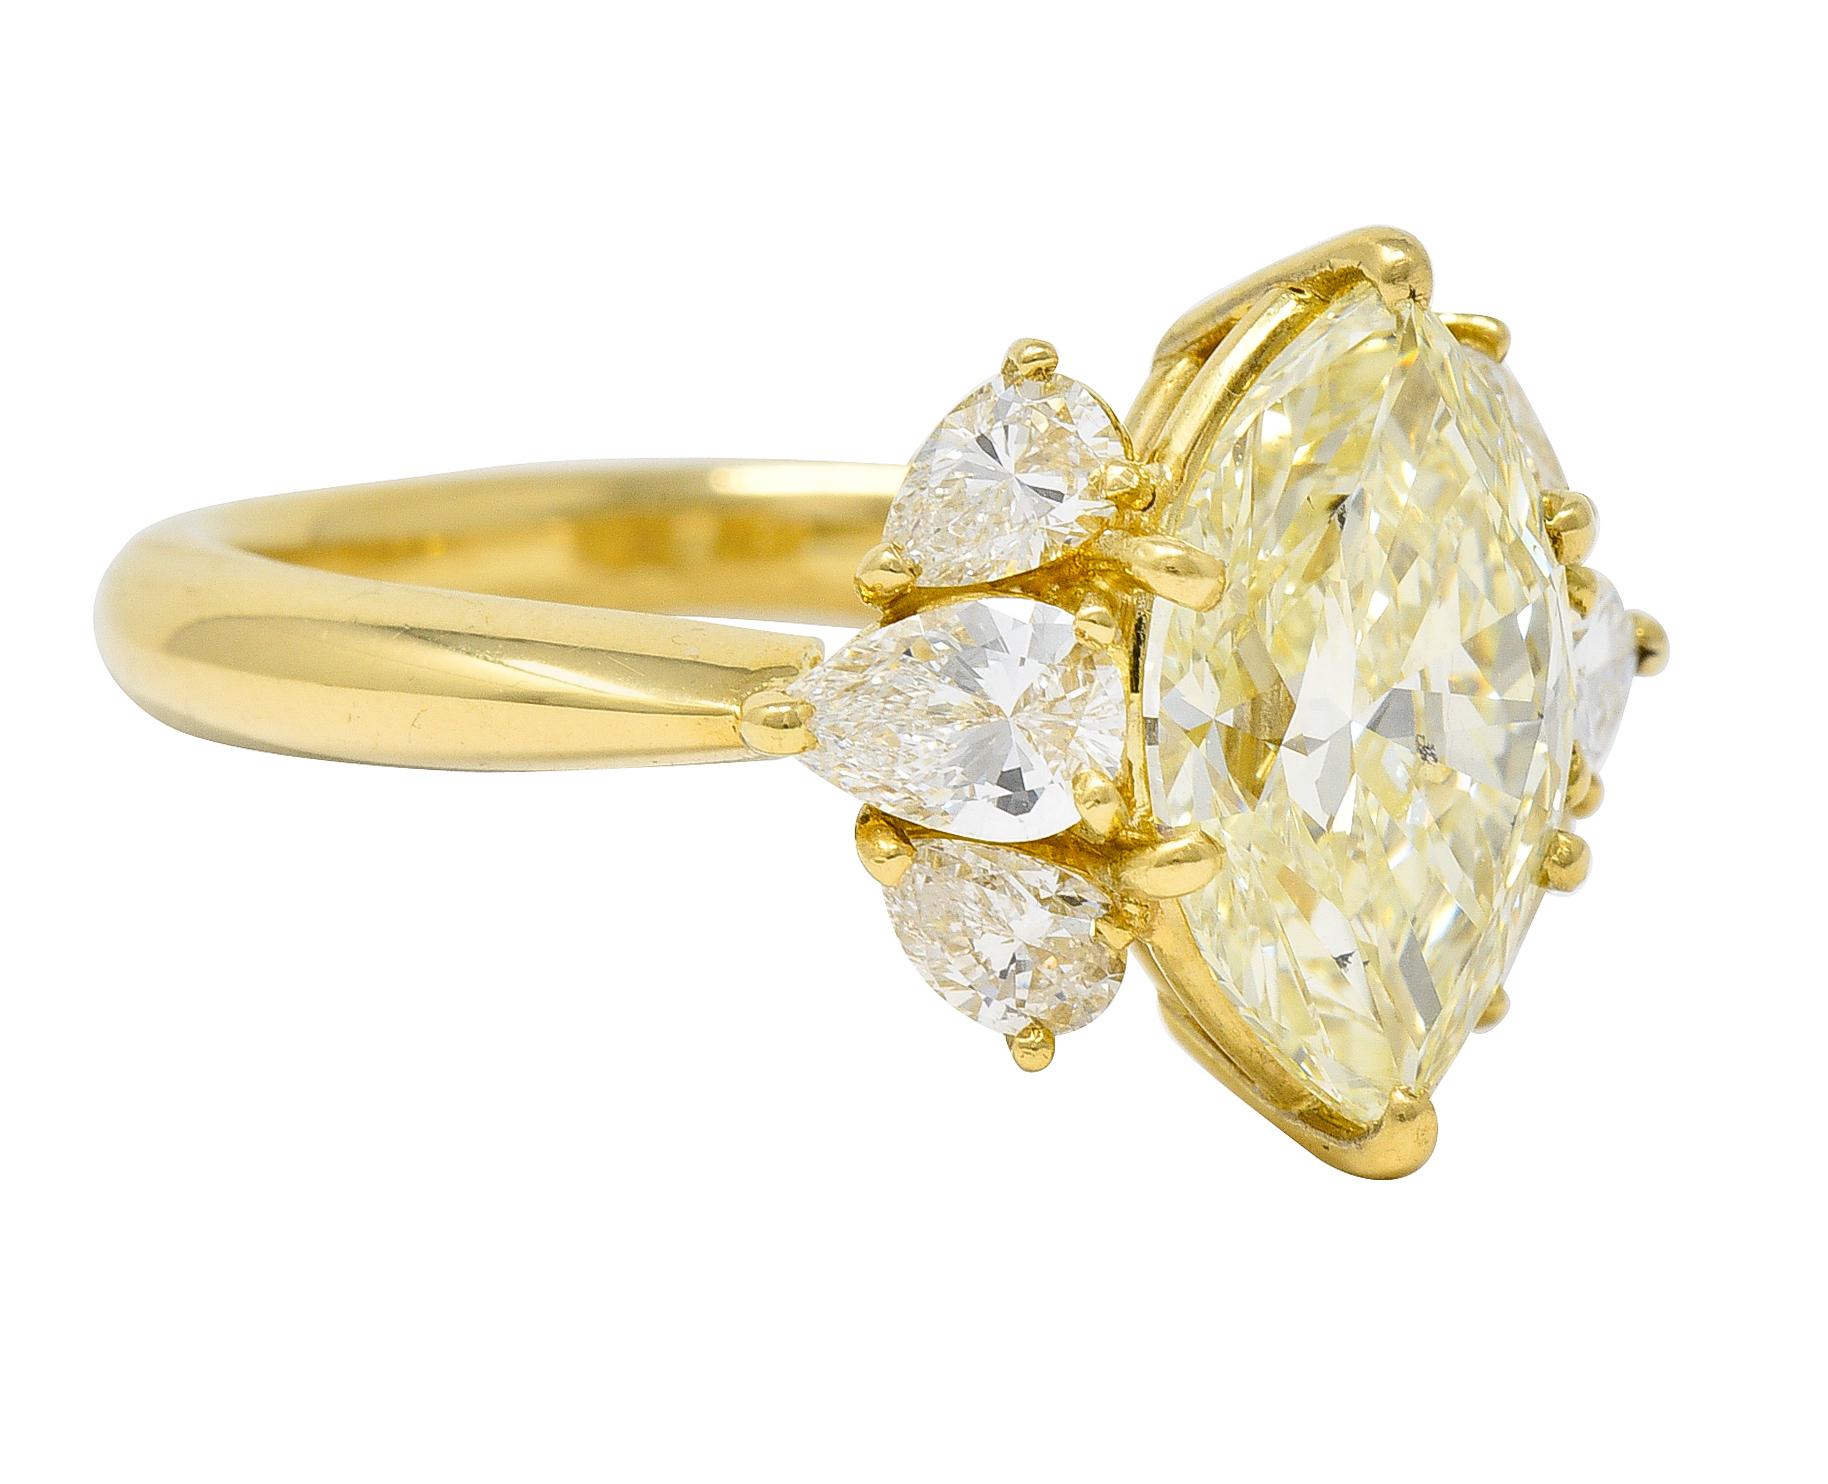 Centering a marquise cut diamond weighing 2.18 carats - Fancy Light Yellow in color with SI1 clarity. Prong set in basket and flanked by clusters of pear cut diamonds. Weighing 0.82 carat total - G/H color with VS clarity. Prong set in baskets and